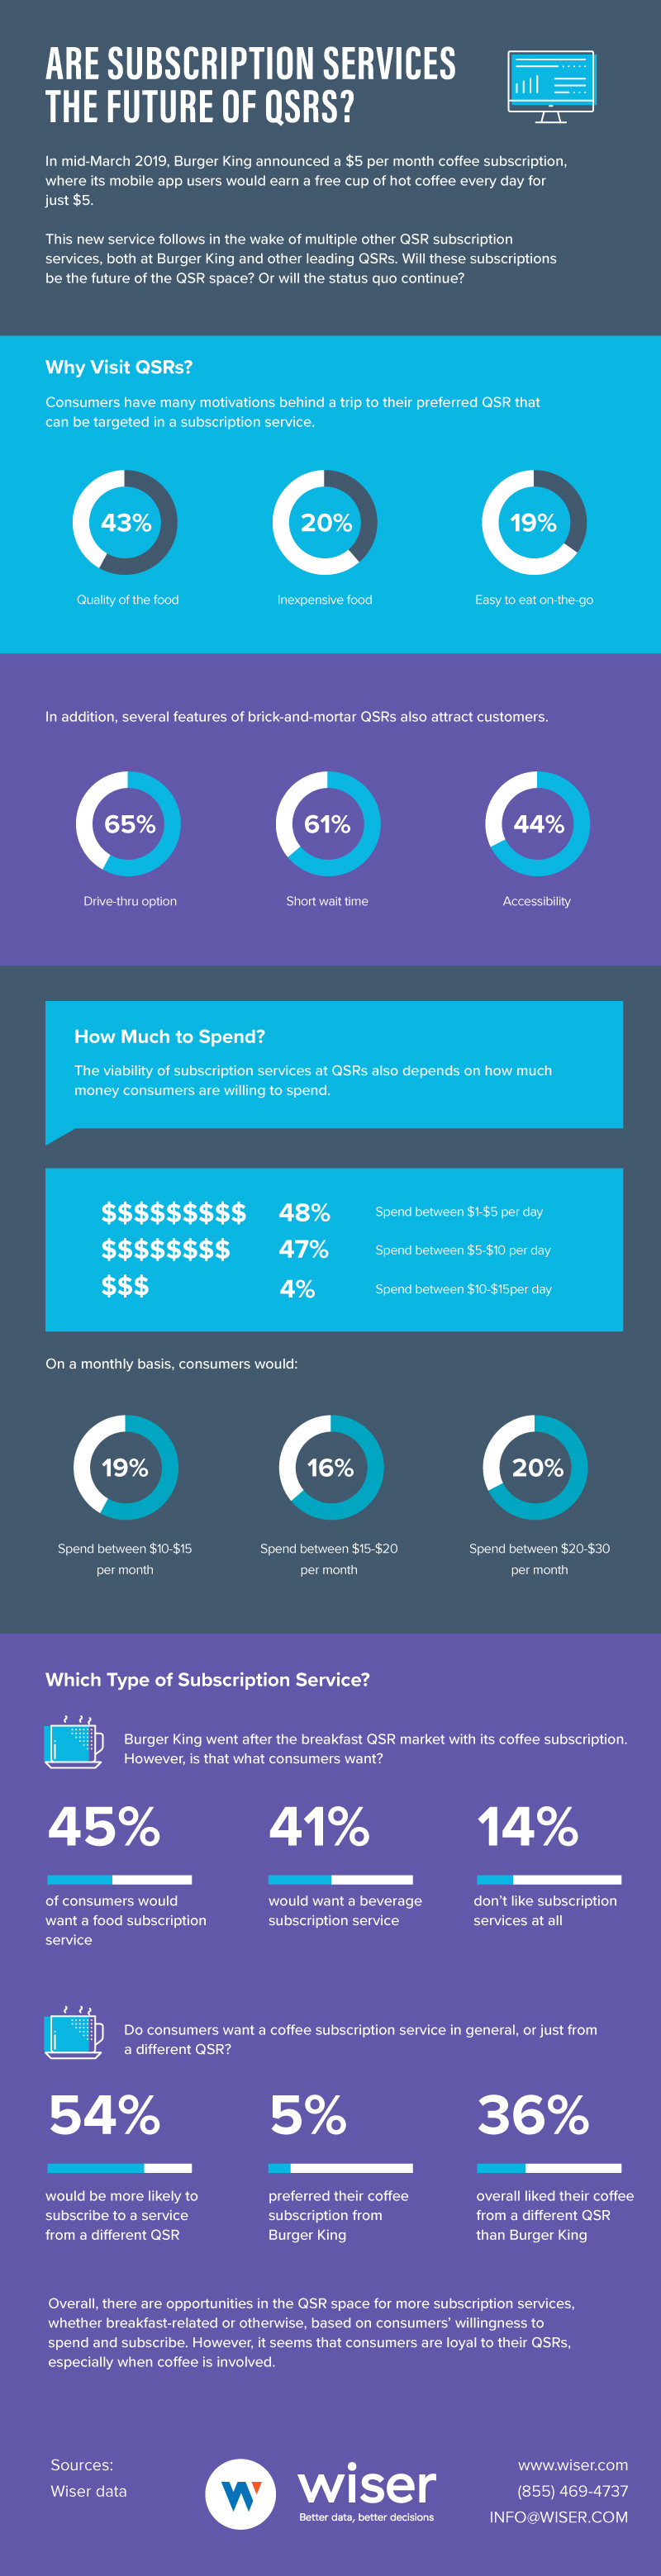 QSR subscription infographic